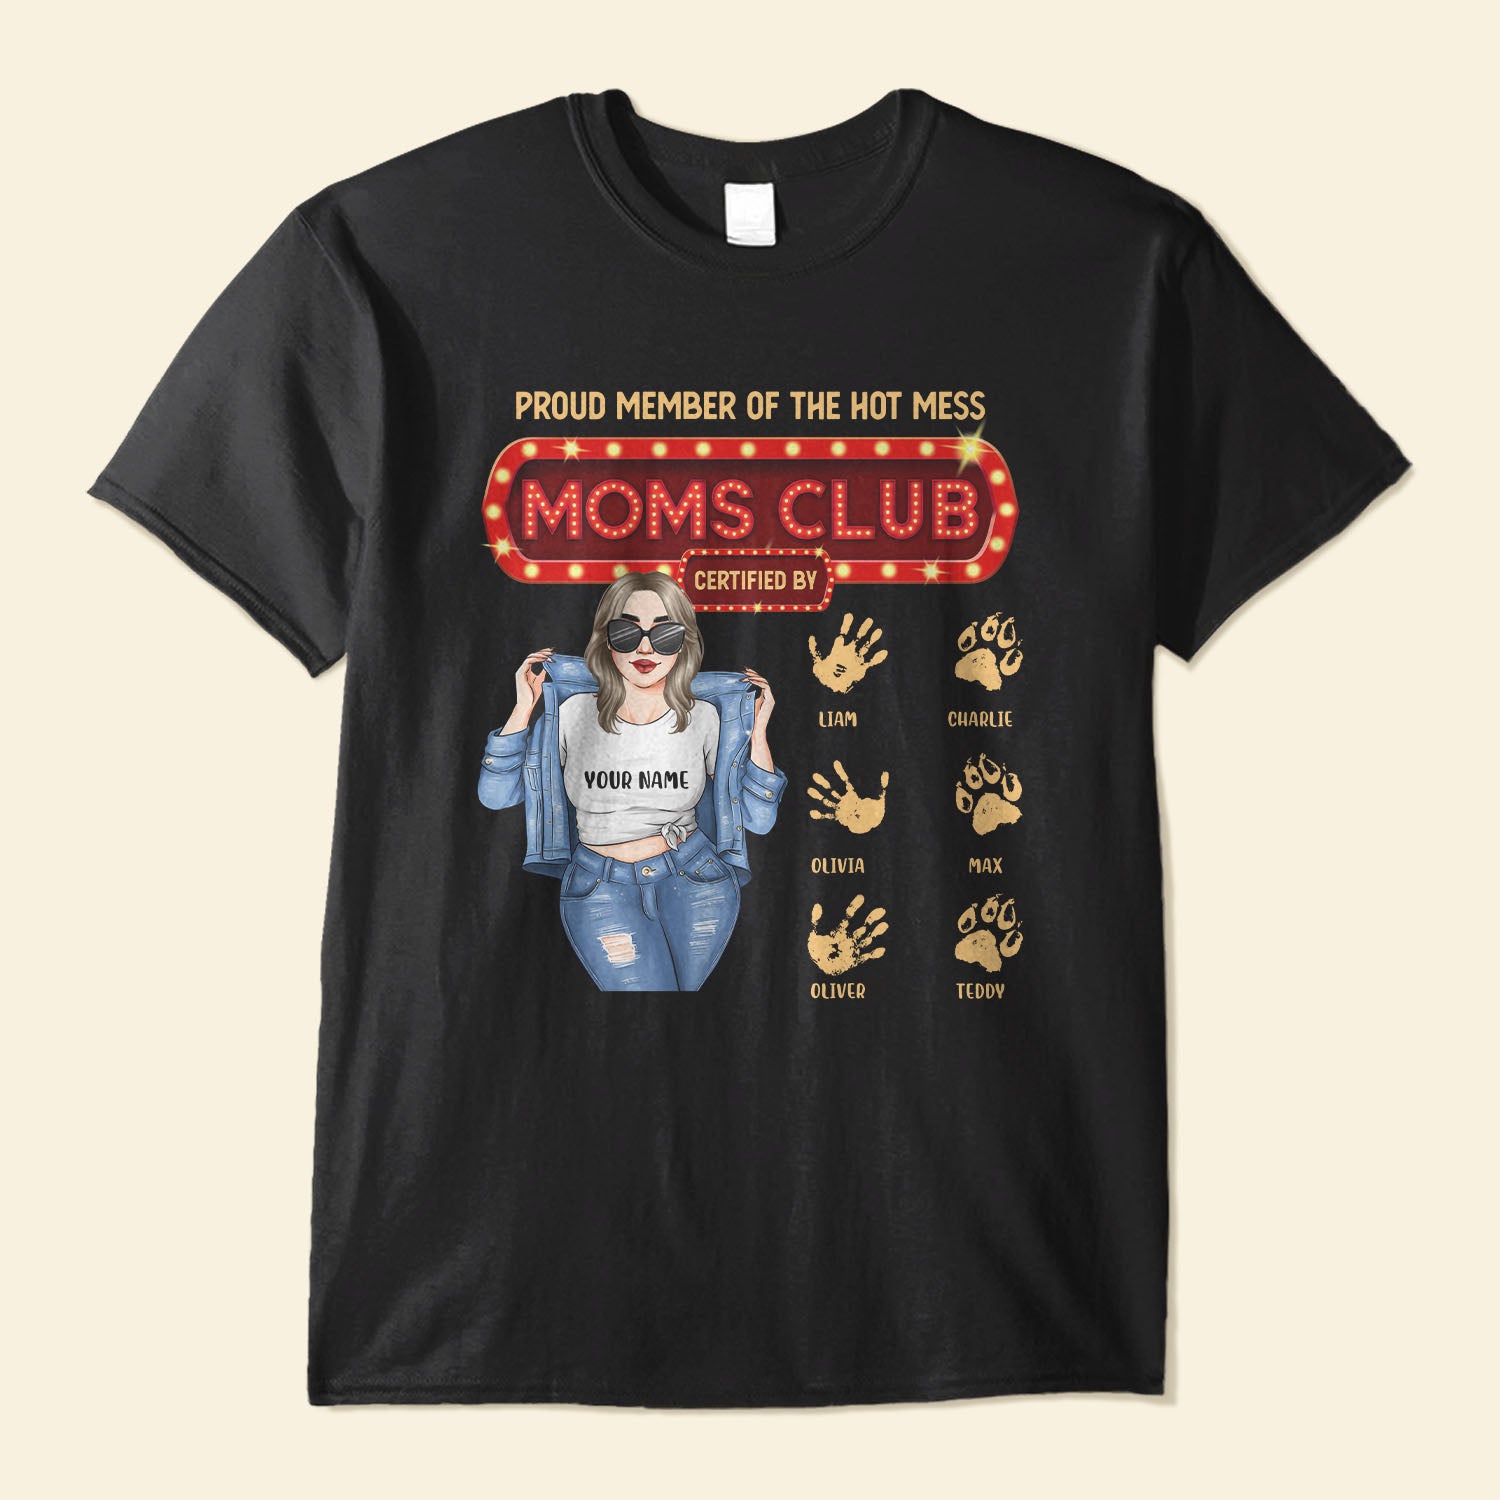 Hot Mess Moms Club - Personalized Shirt - Birthday Gift For Mom